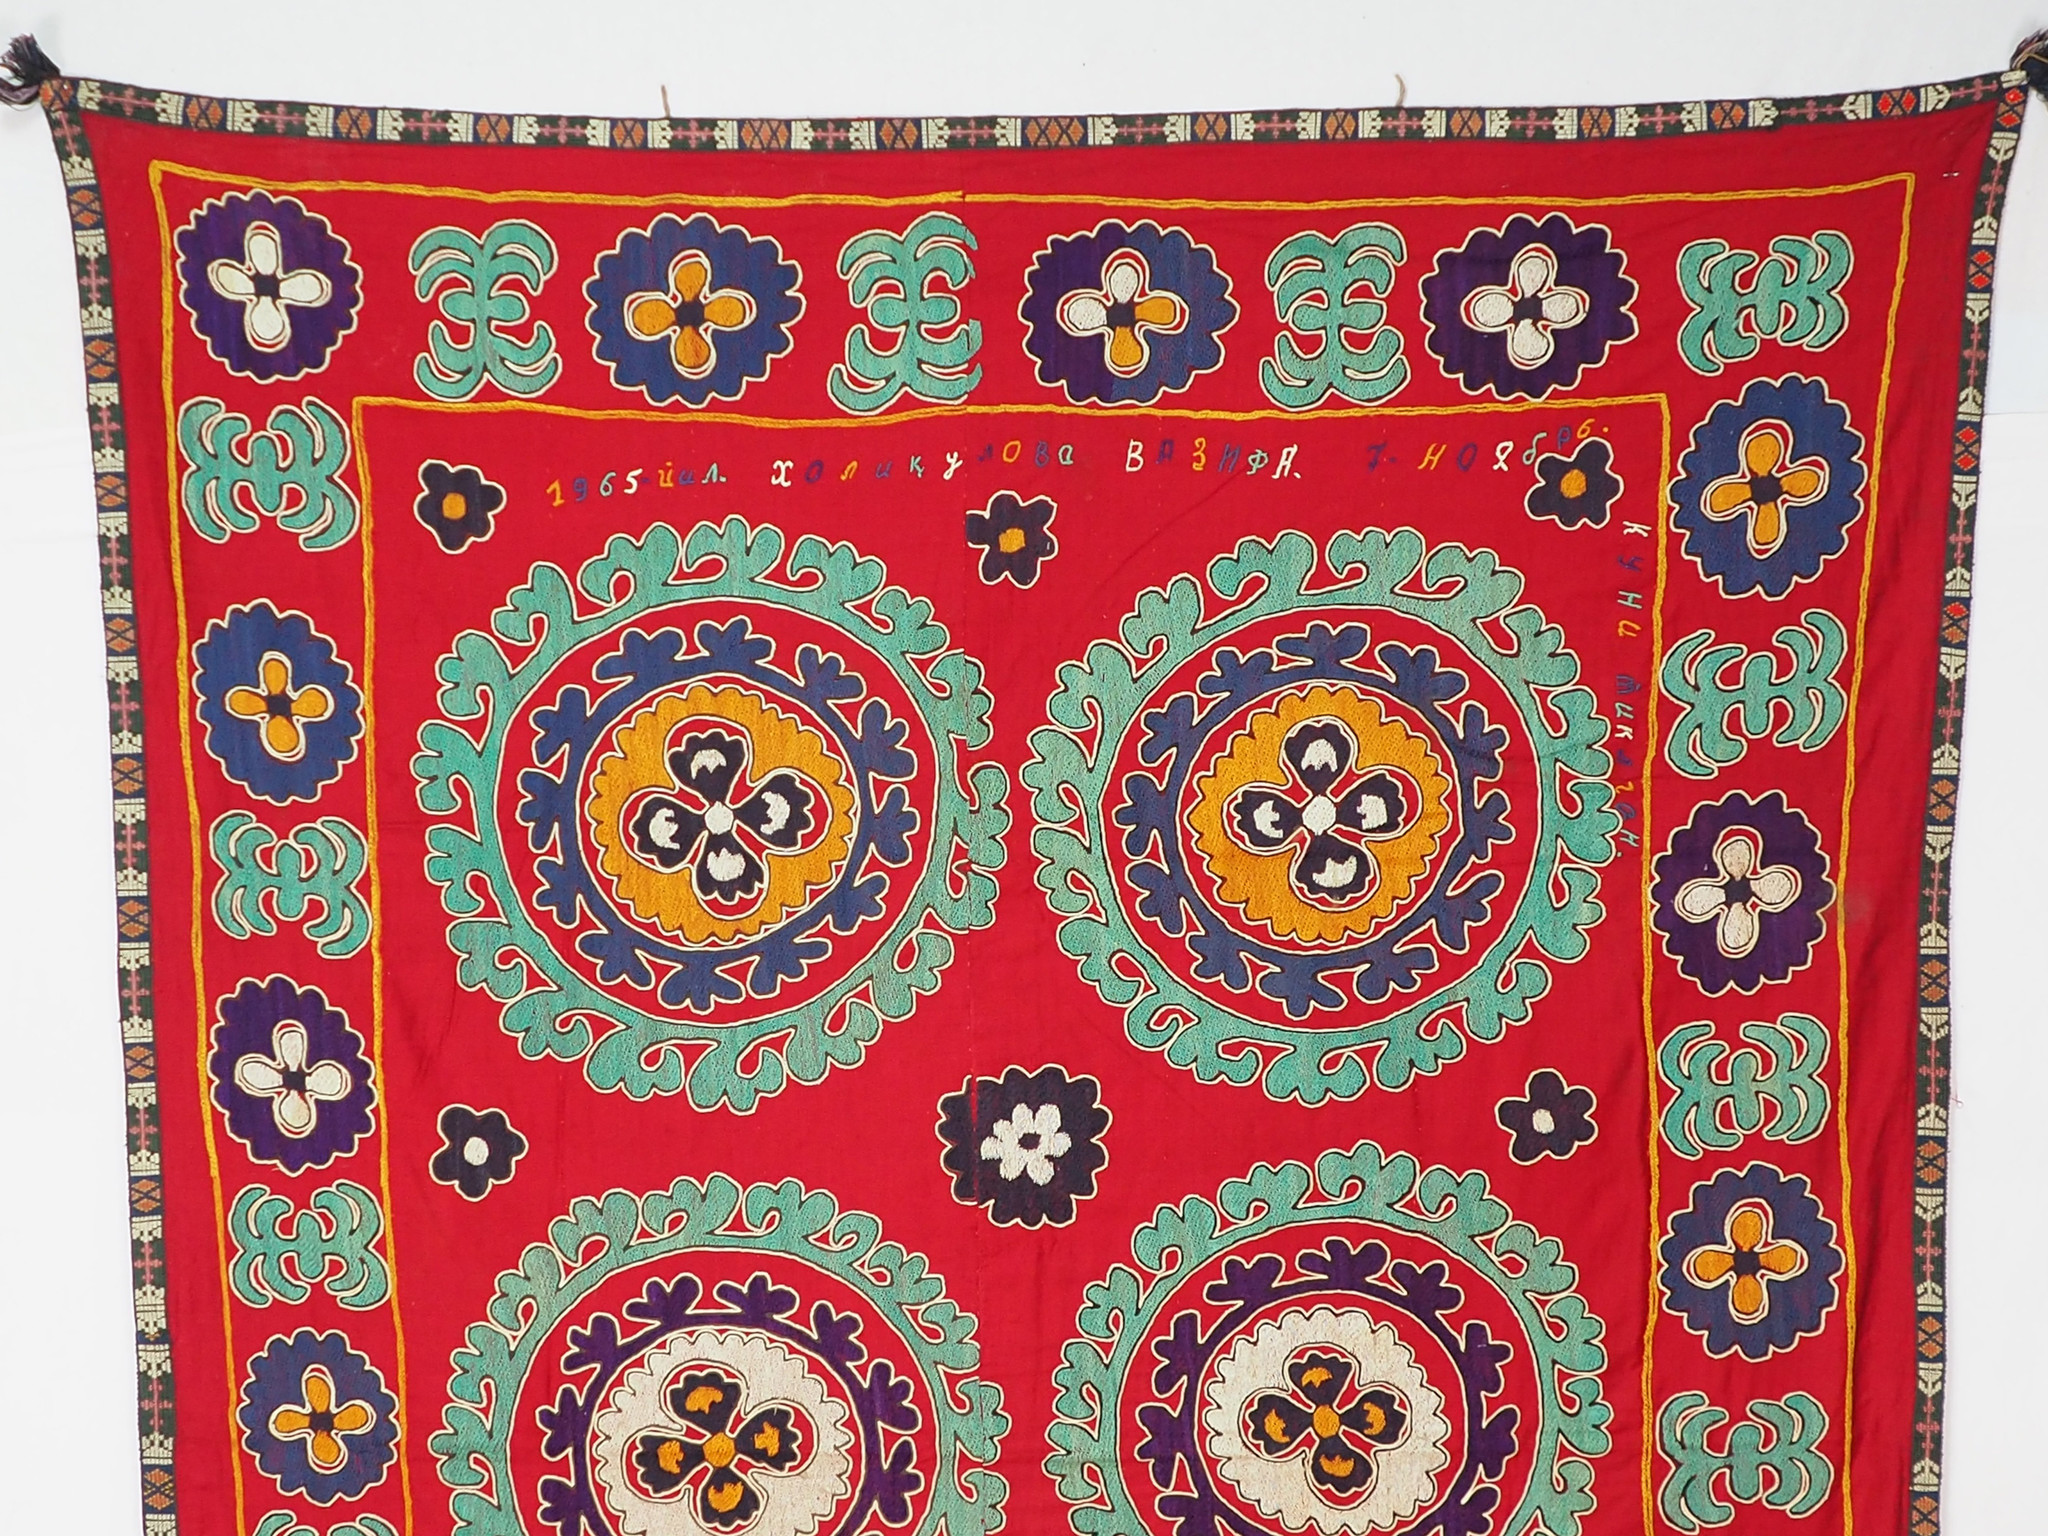 190x130 cm Hand Embroidered suzani from Uzbekistan.Tablecloth, Wall hanging, Bedspread,Bedcover No.SZ-28